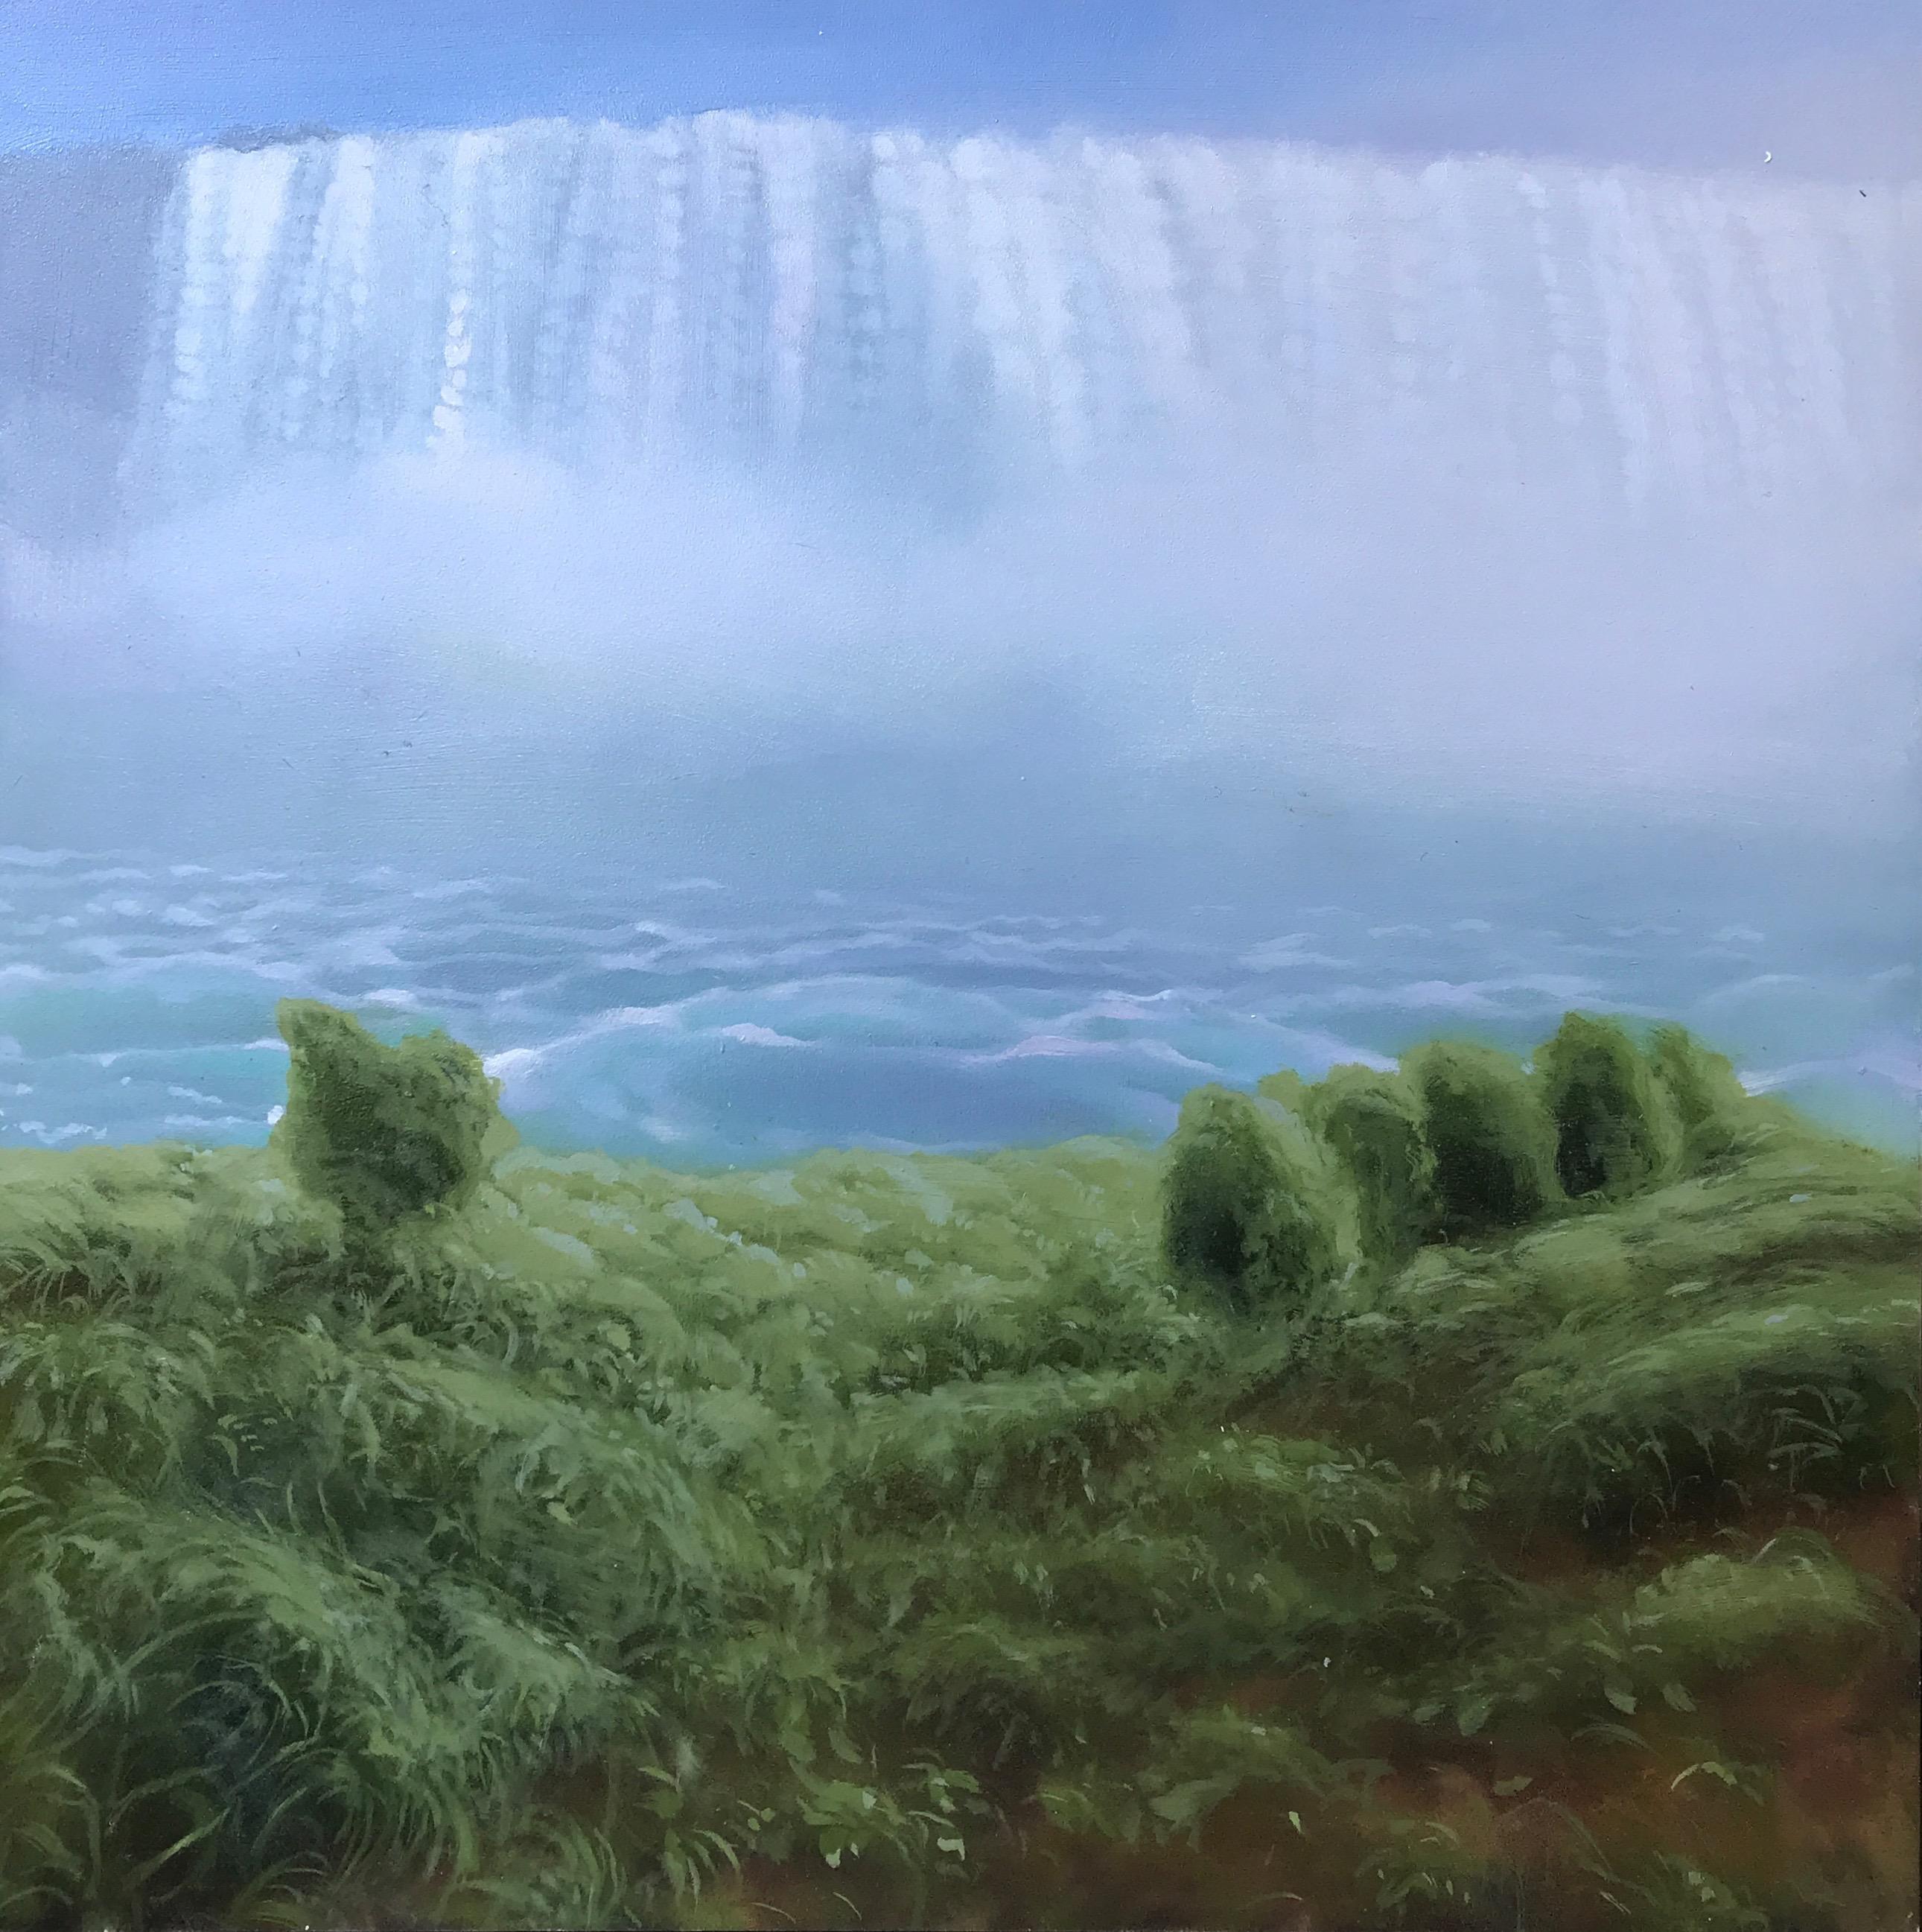 "Waterfall with Spray and Shrubs" Small Landscape with Waterfall, Sky, Greenery 